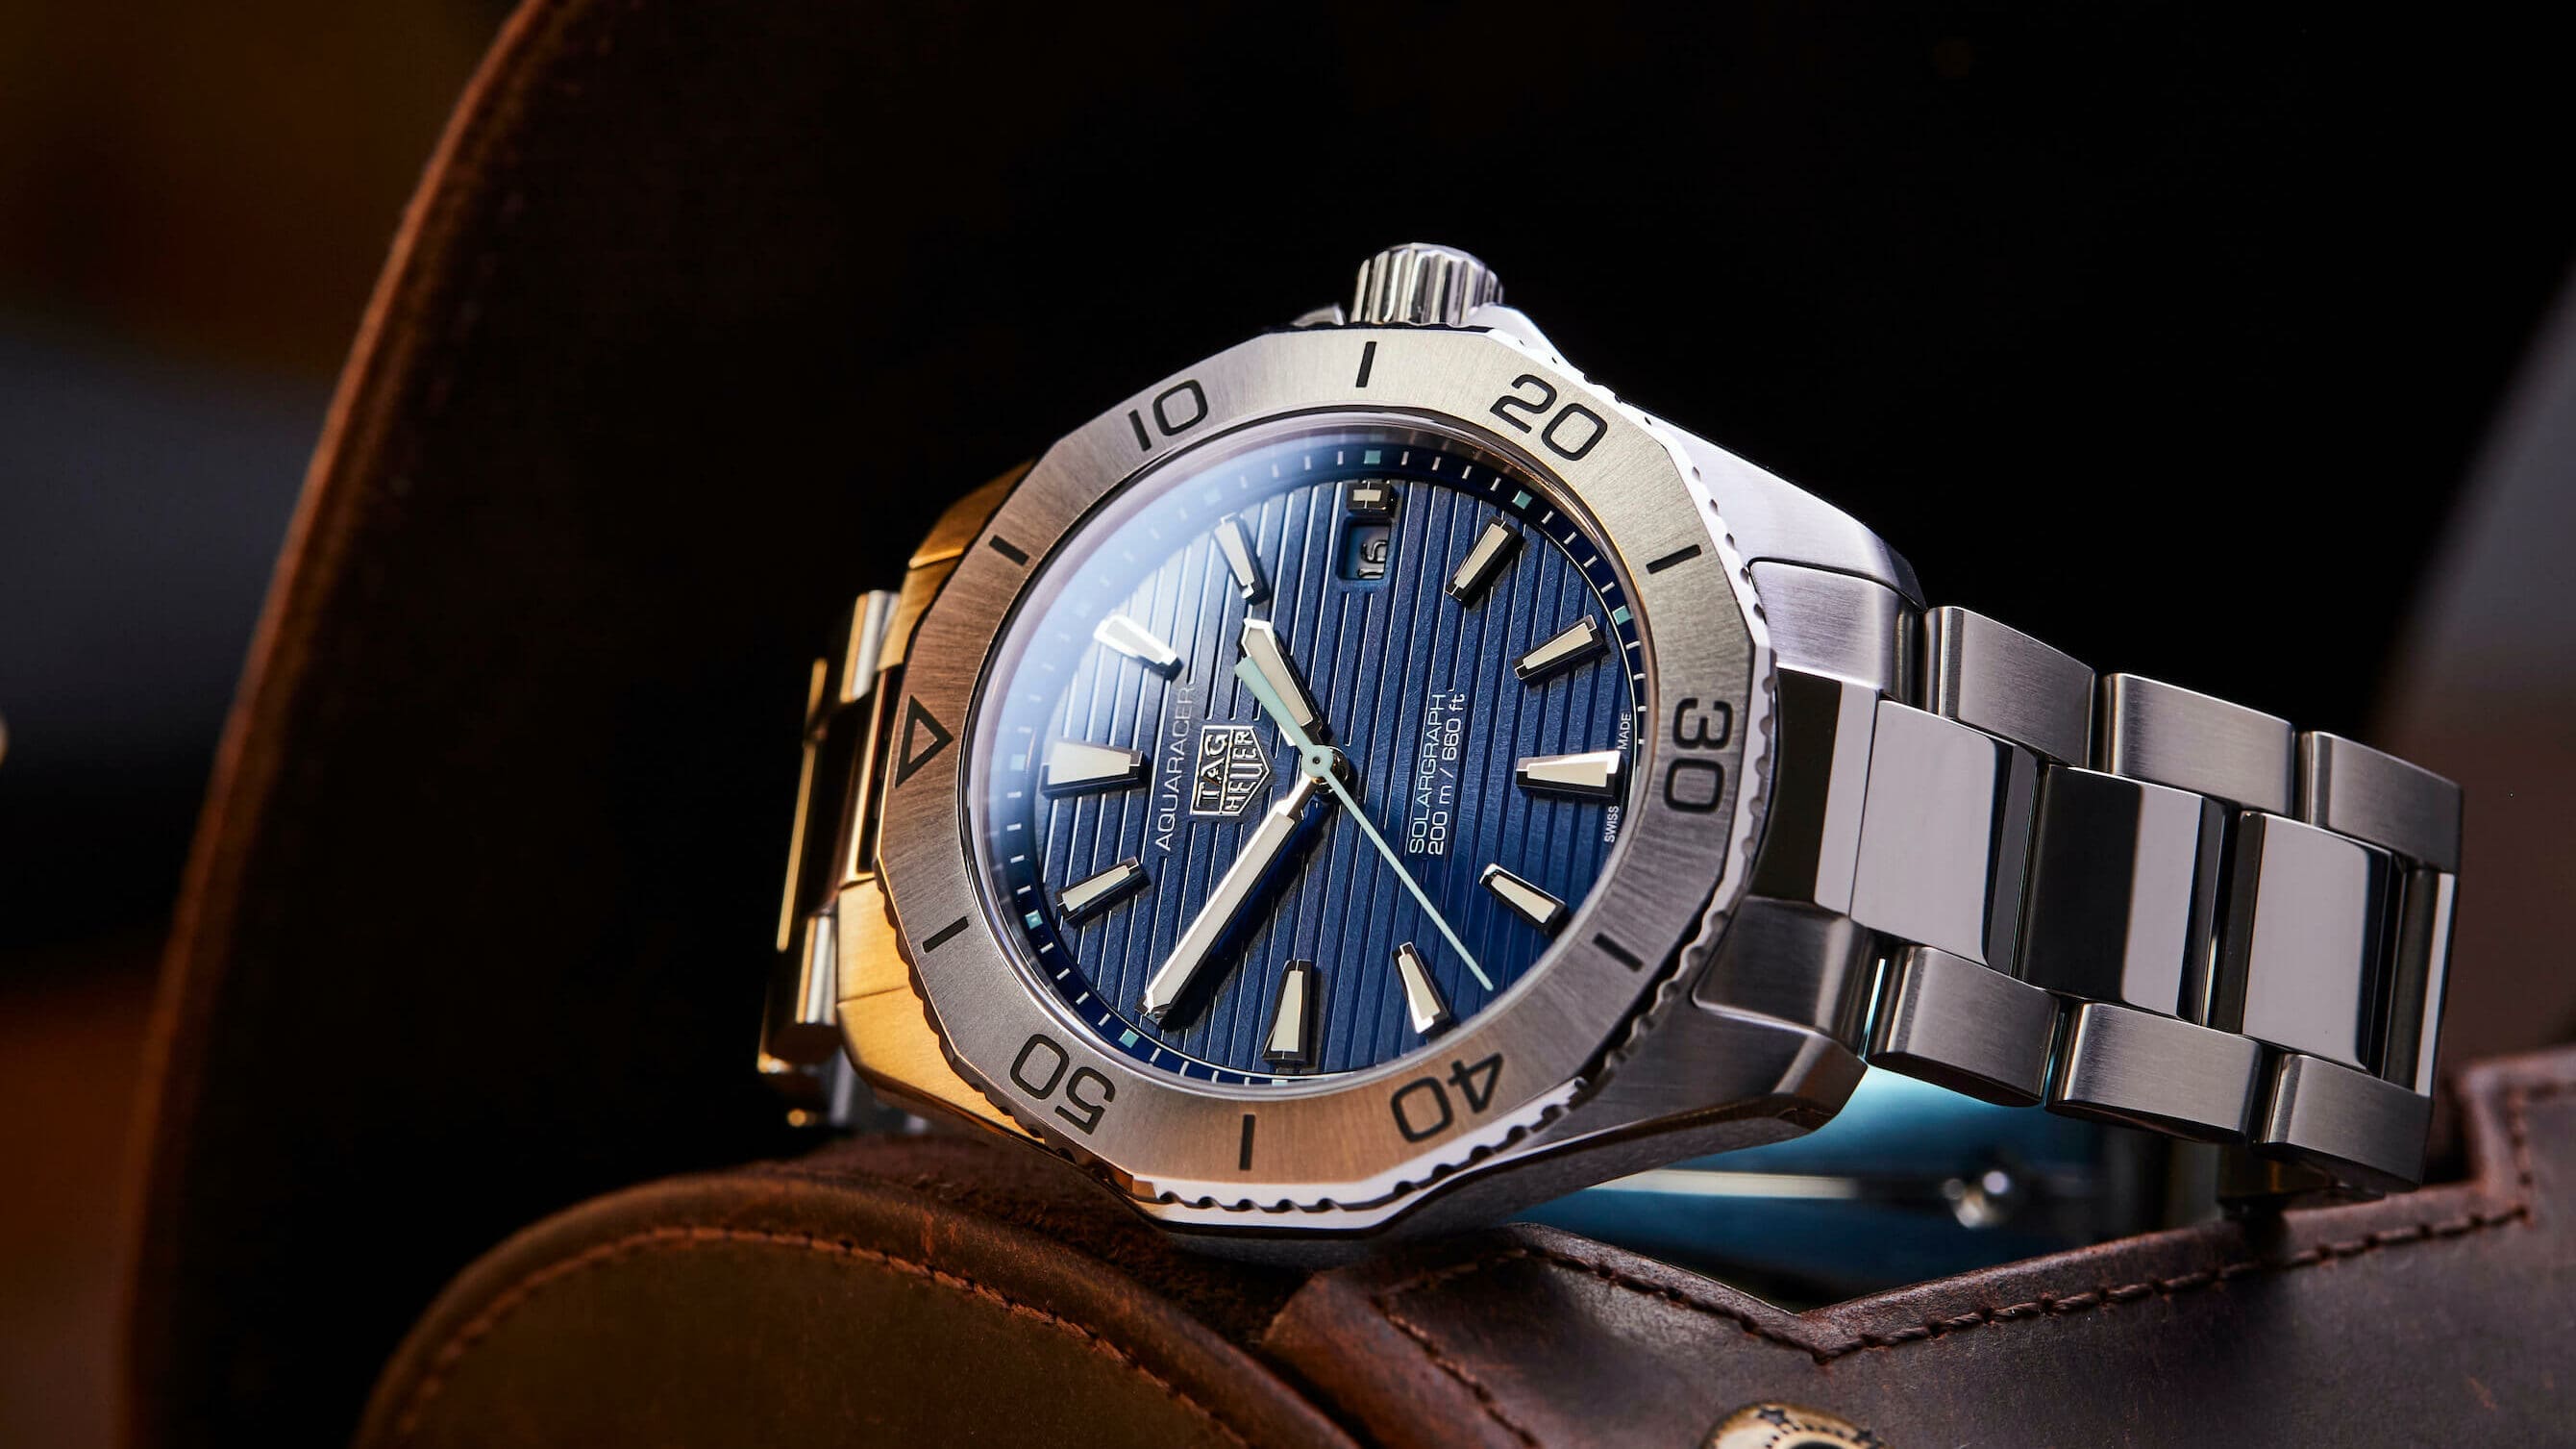 The TAG Heuer Solargraph in steel offers a heightened sense of elegance